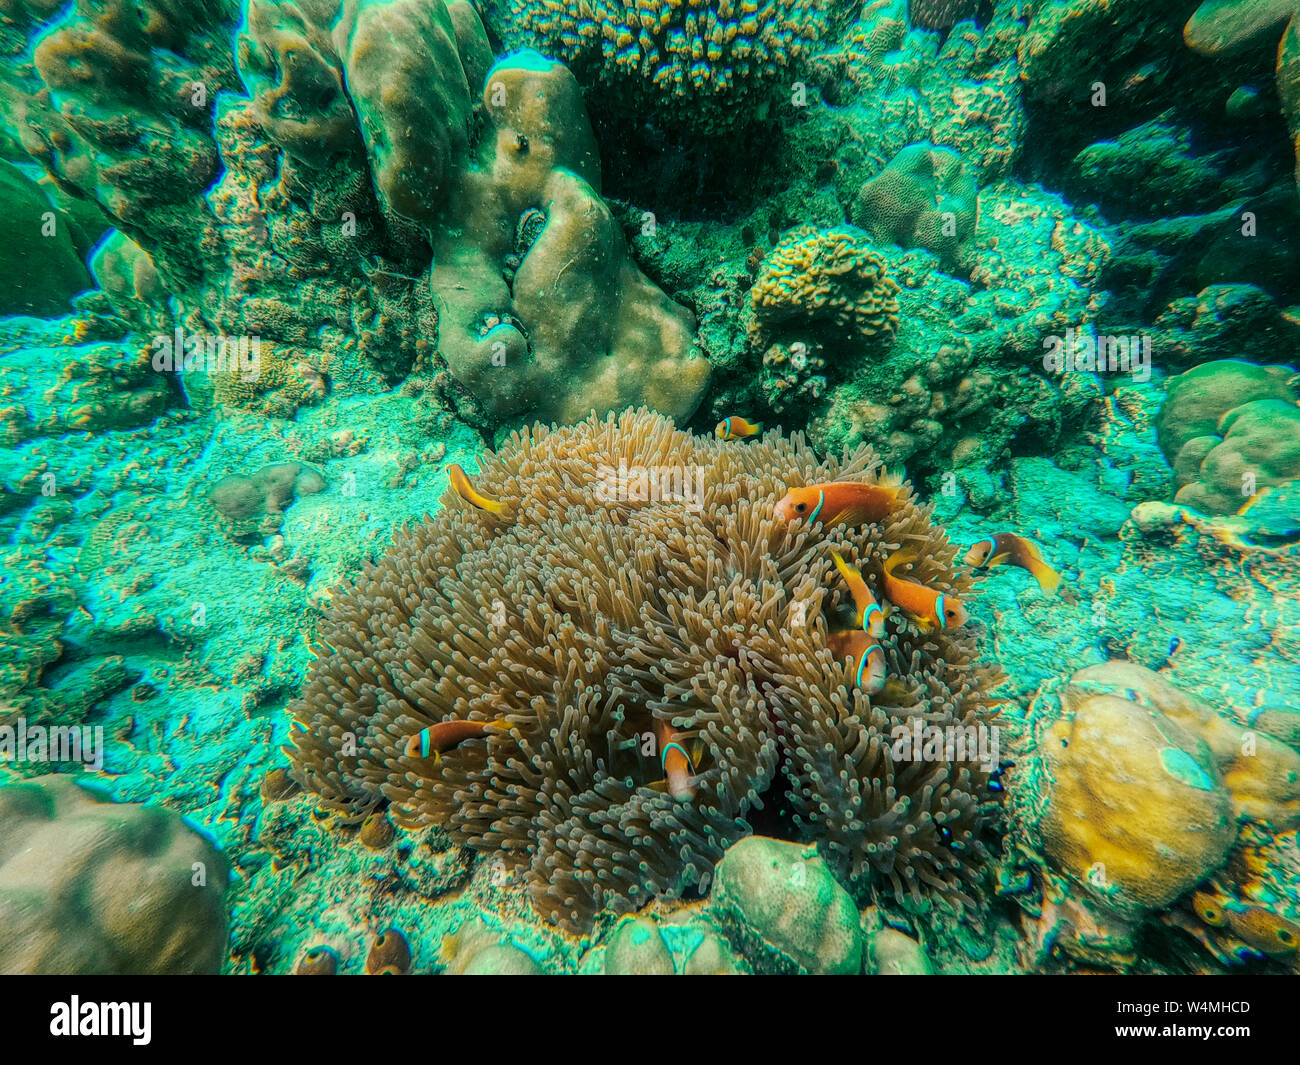 This unique photo shows the lively underwater world of the Maldives with anemones and fish. Stock Photo